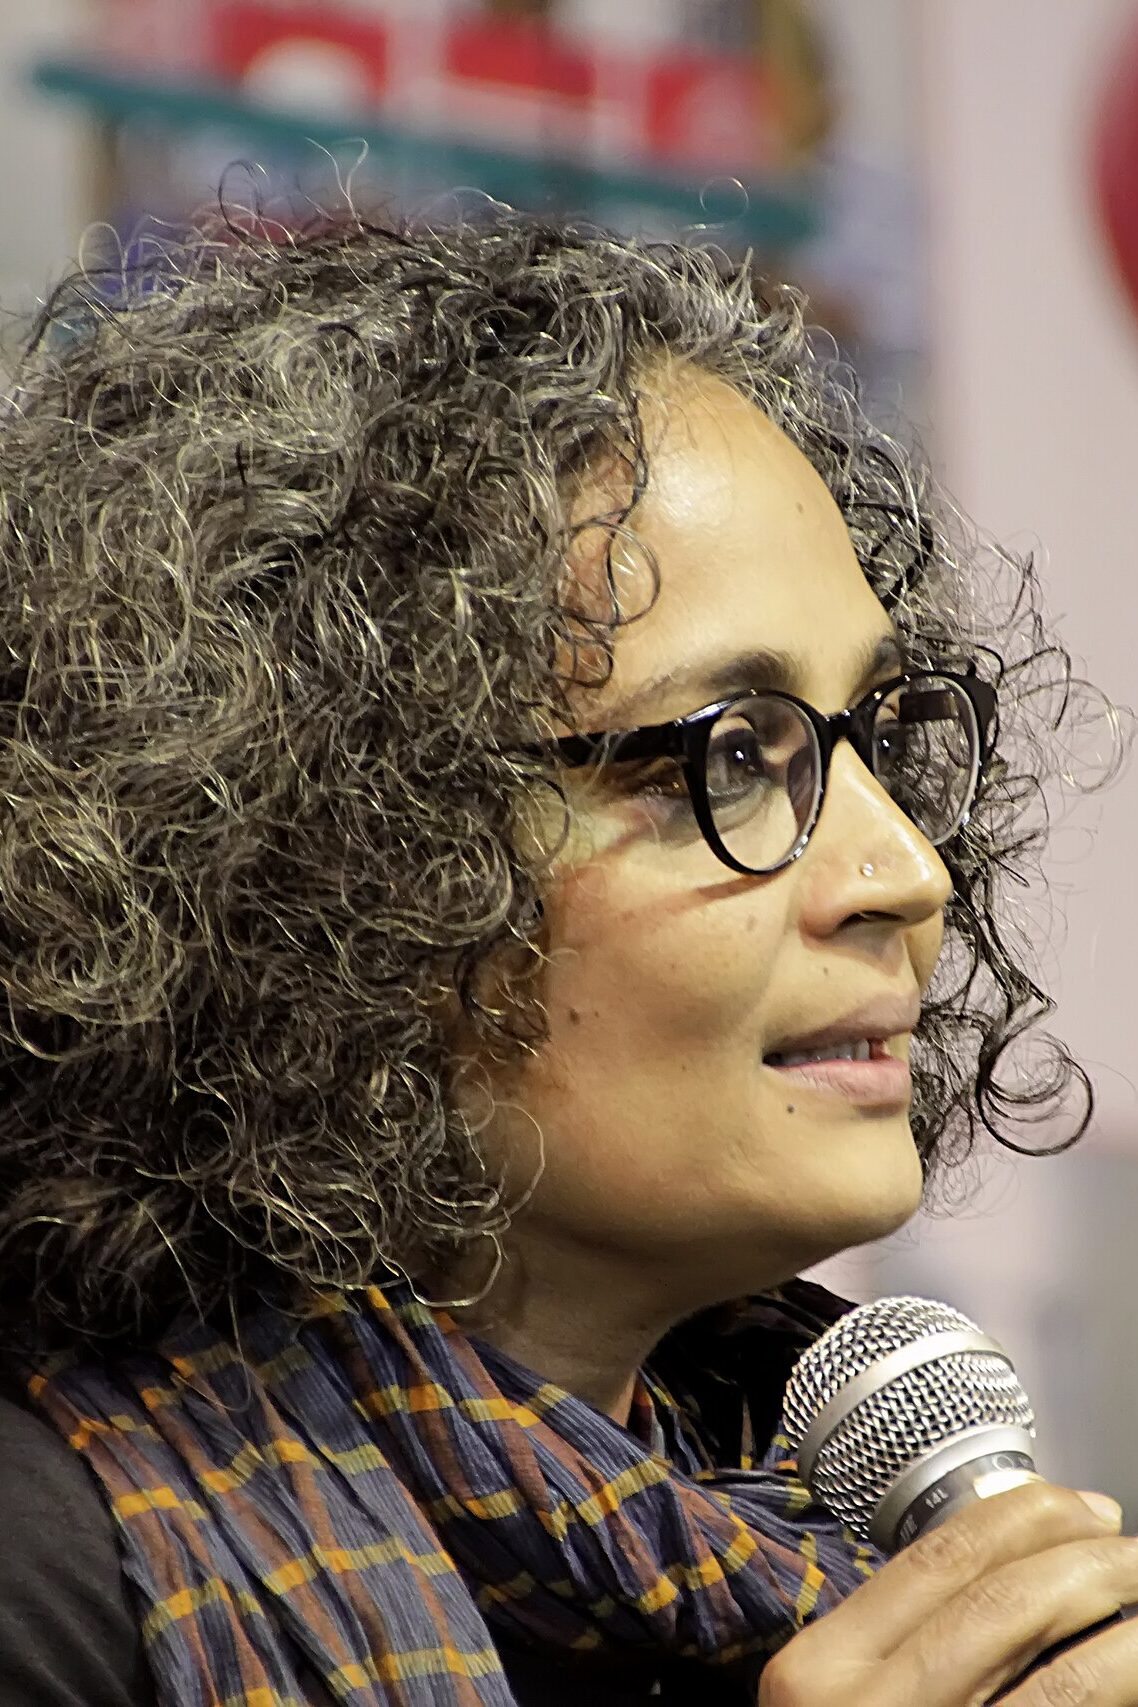 Arundhati Roy, Writer of Man Booker Prize for Fiction winning novel The God of Small Things (1997), speaks into a microphone. Photo credit: Vikramjit Kakati